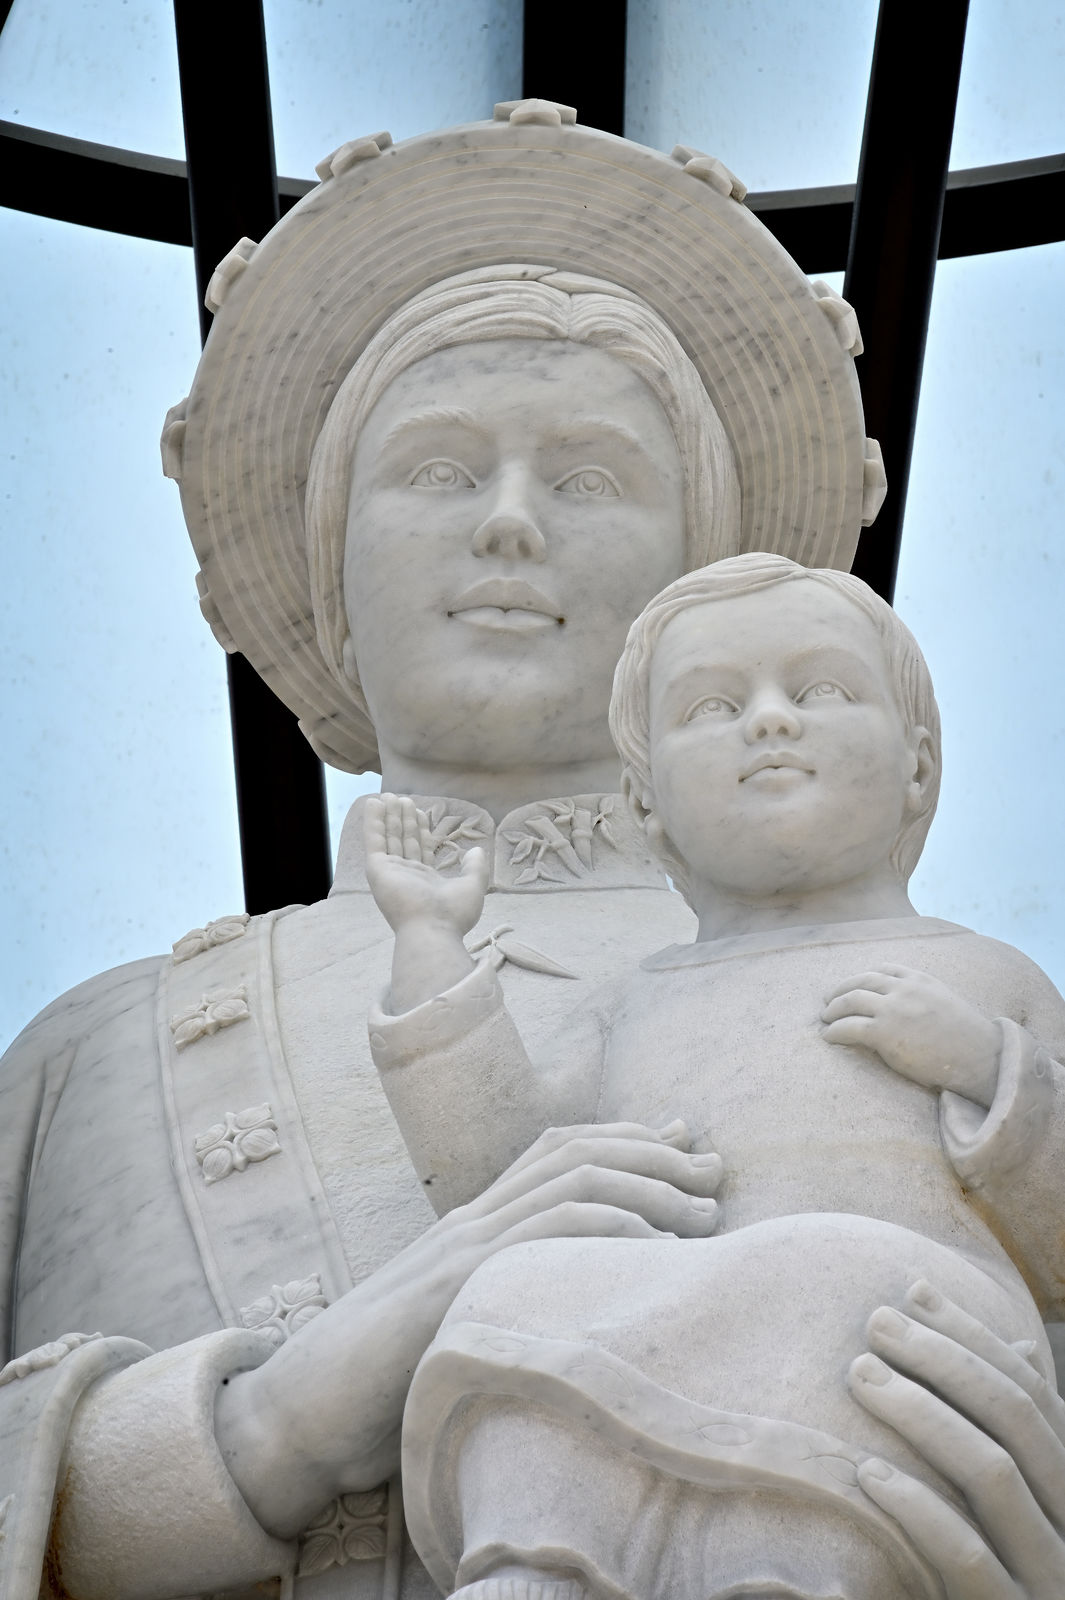 The Our Lady of La Vang statue at the Christ Cathedral campus depicts the Virgin Mary with a Eurasian face, holding the Baby Jesus and wearing a traditional Vietnamese áo dài dress and khăn đống hat. Photo courtesy Diocese of Orange.